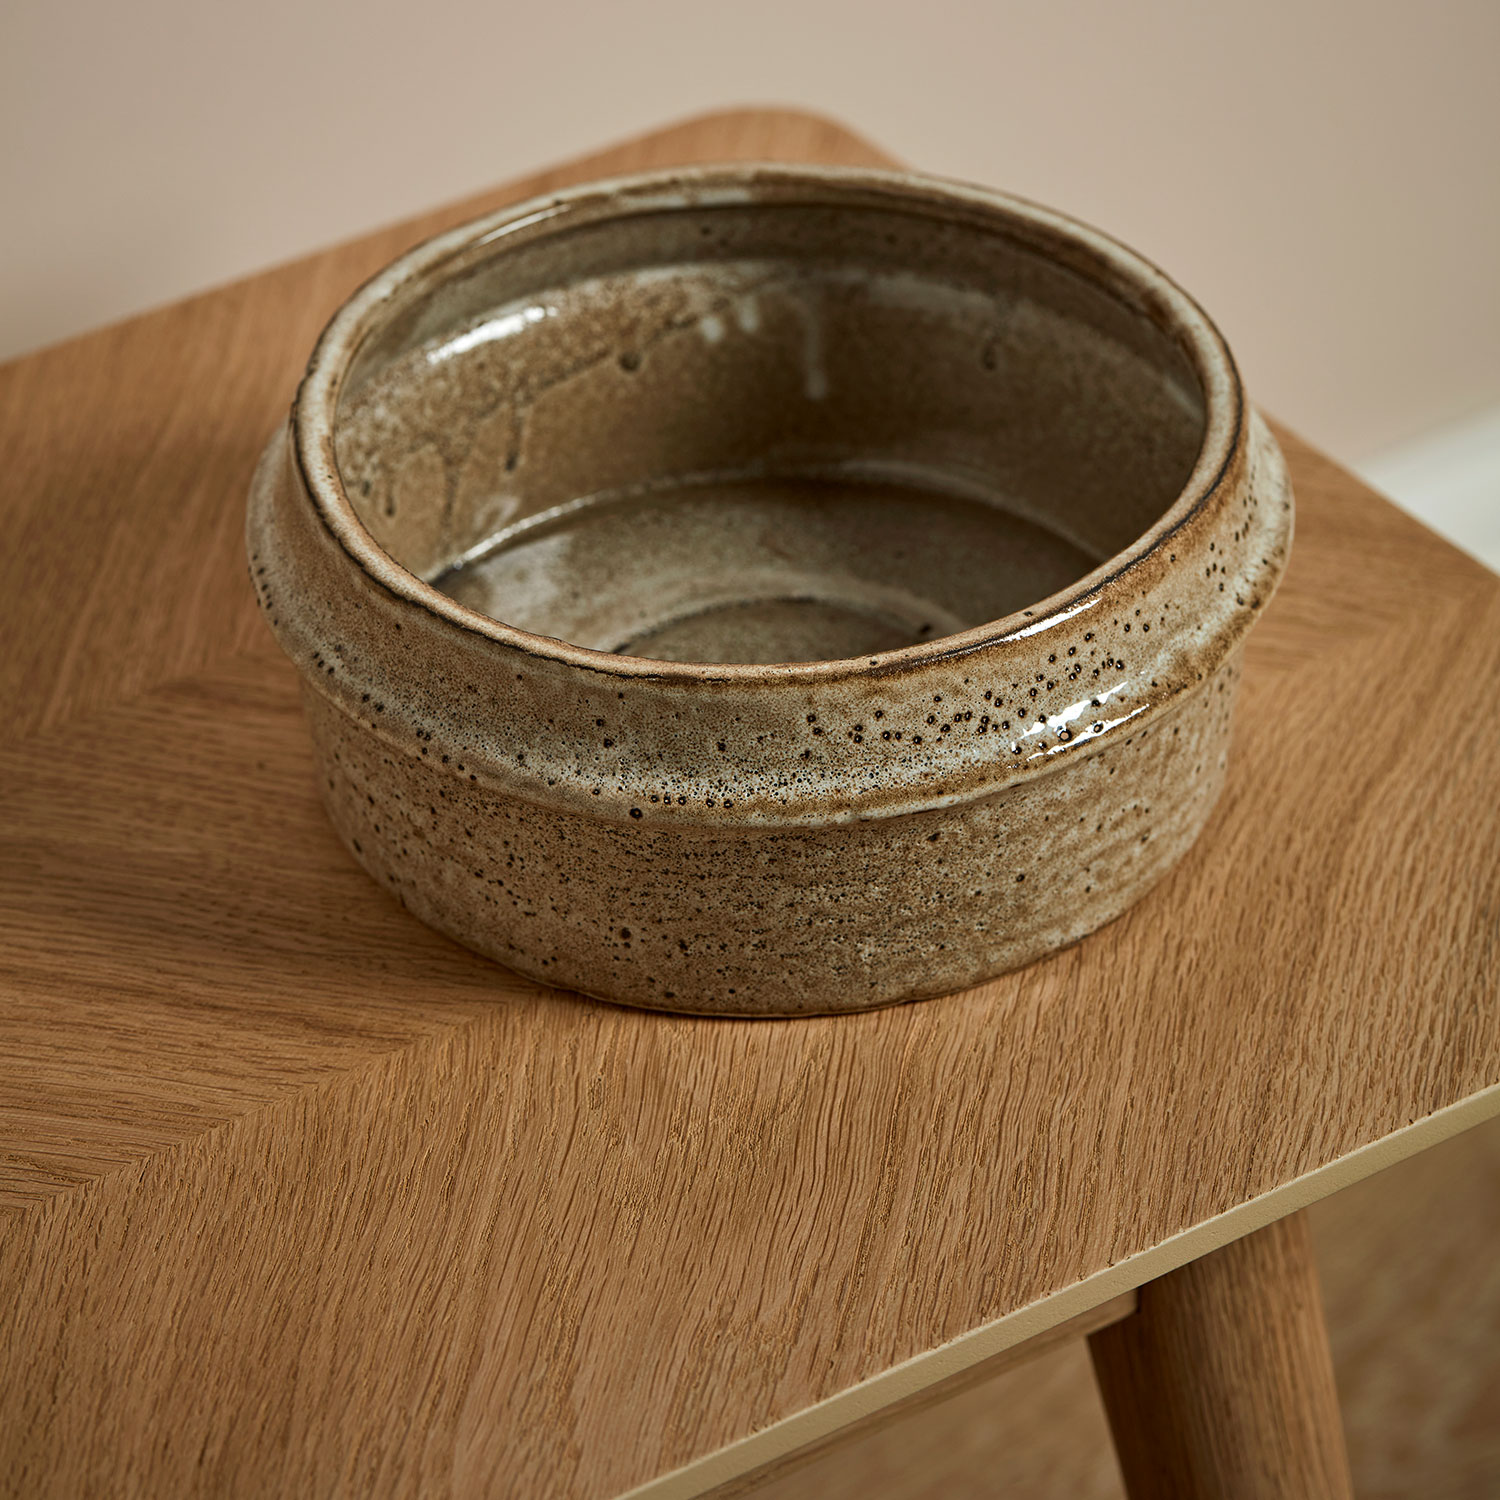 Marton Plant Pot Small Stone on a wooden table